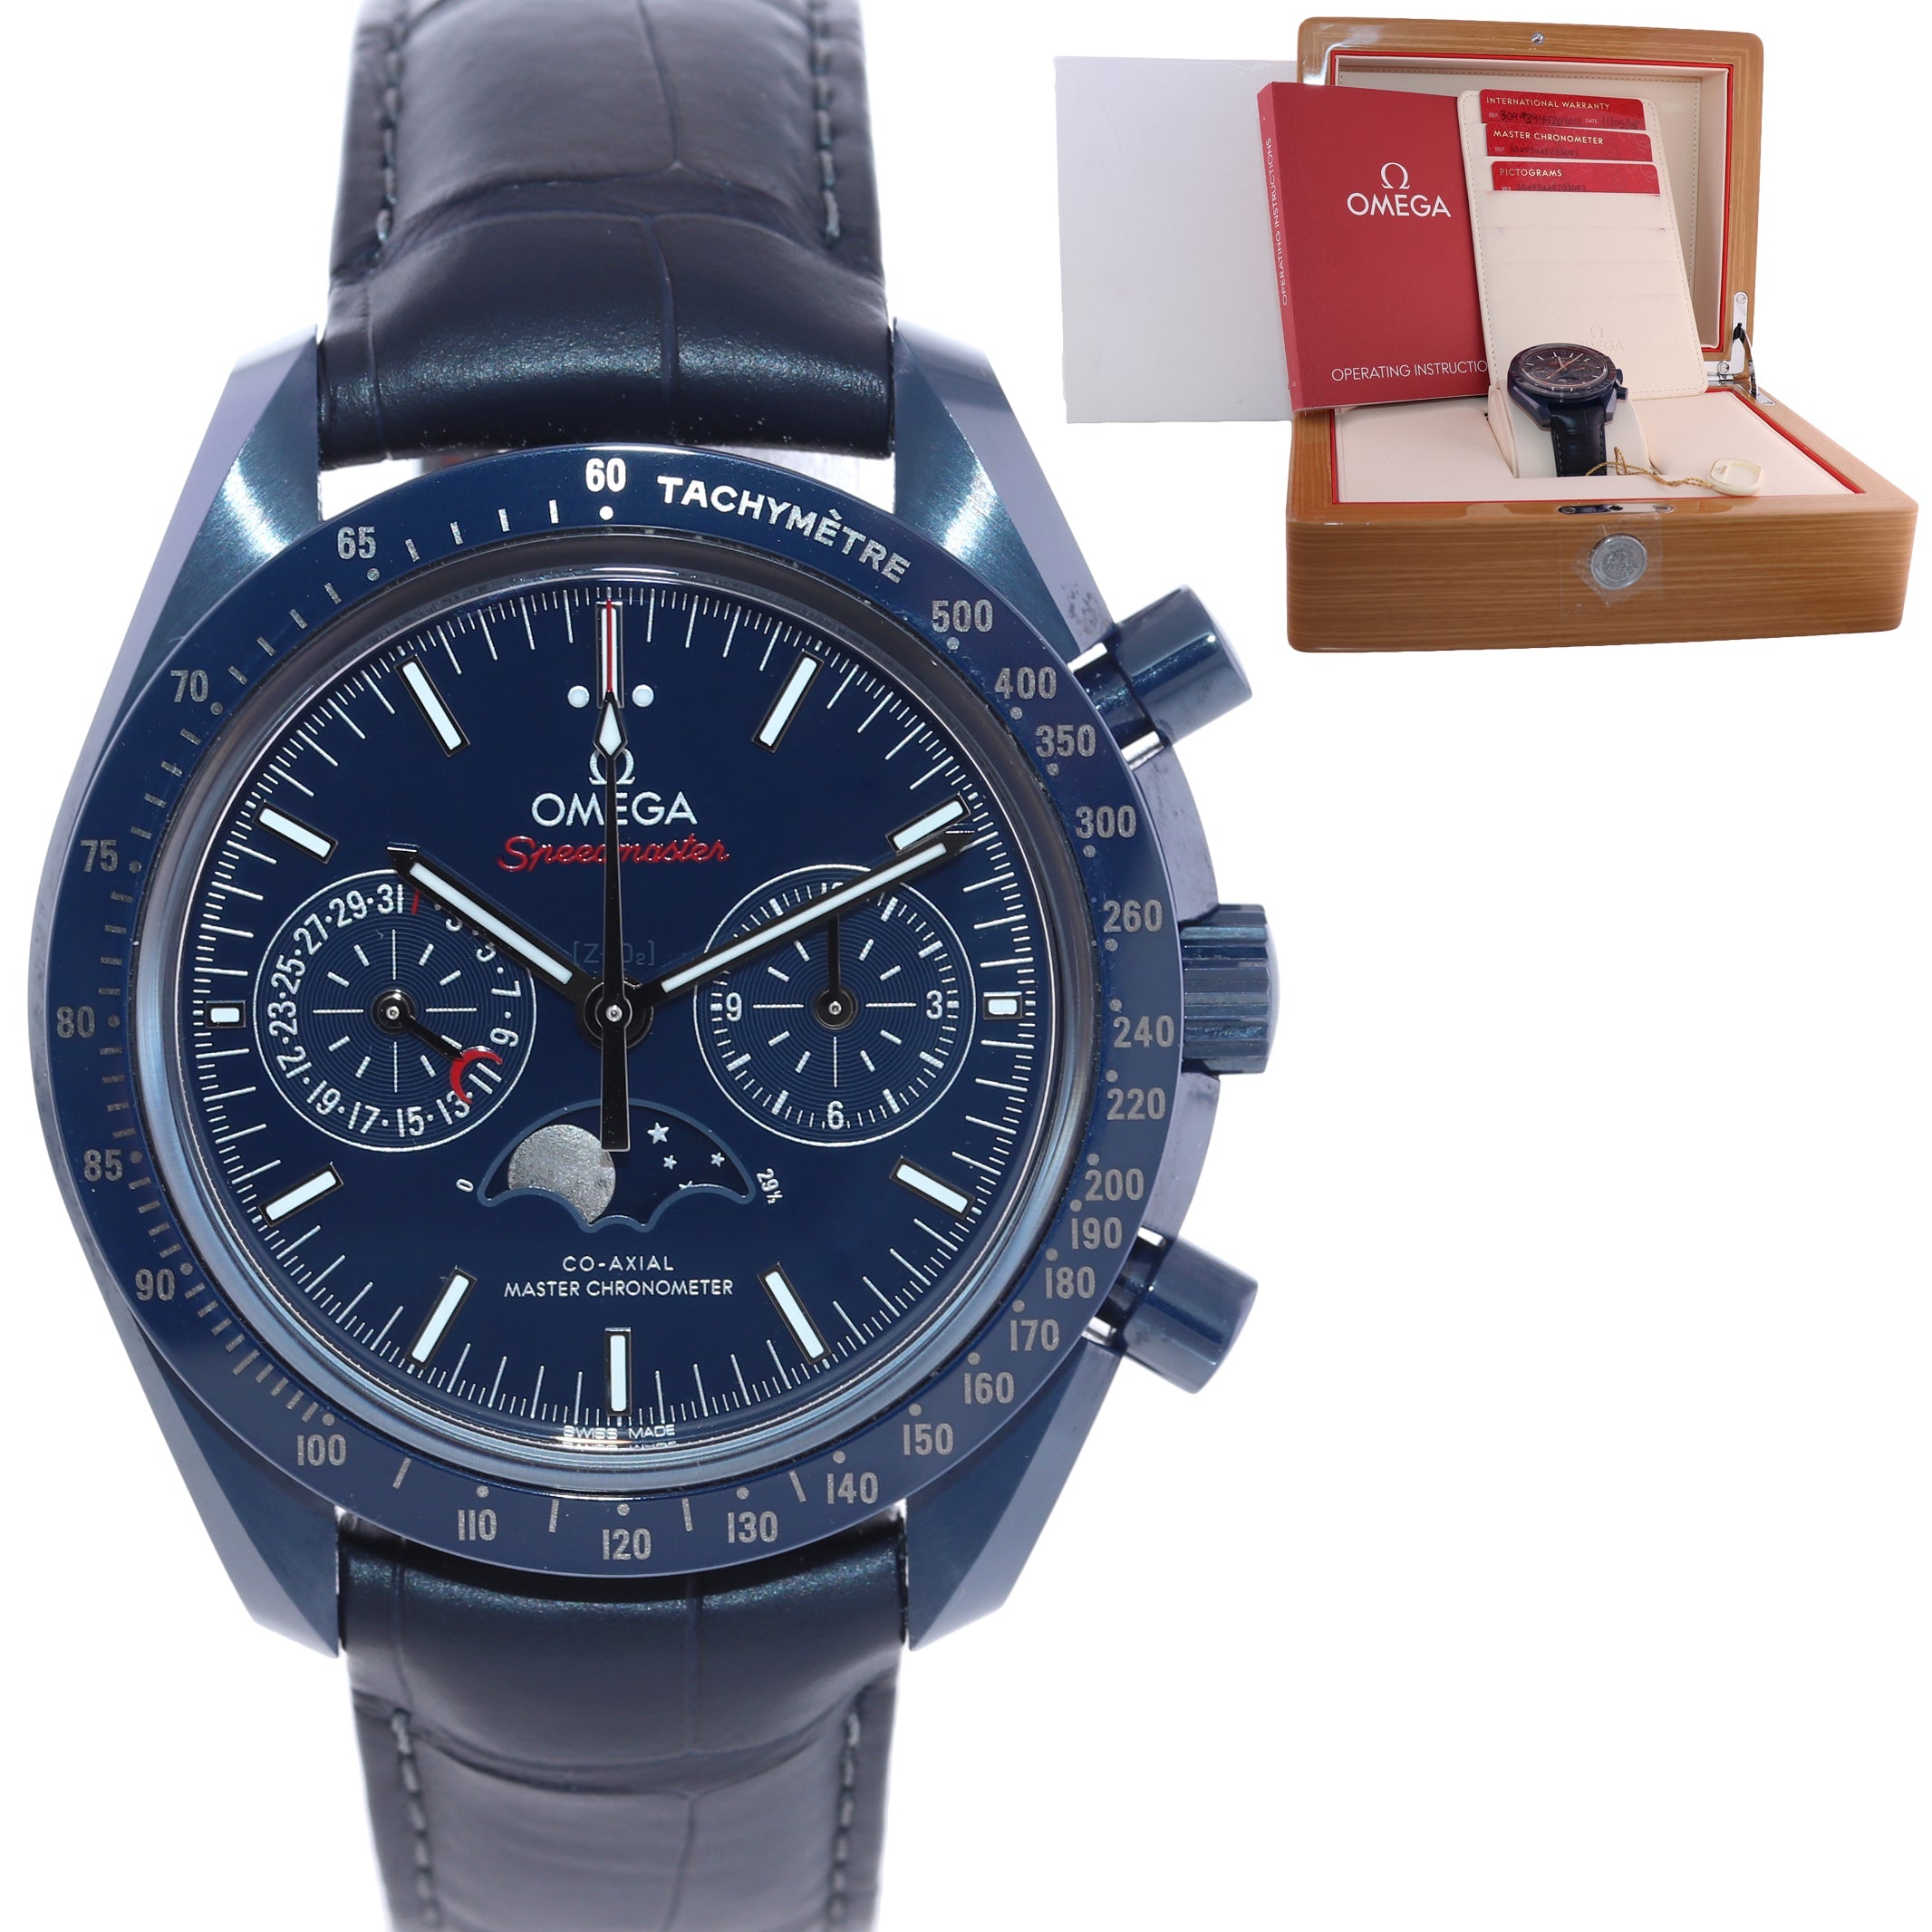 PAPERS NEW Omega Speedmaster Moonphase 304.93.44.52.03.001 Blue Moon Watch